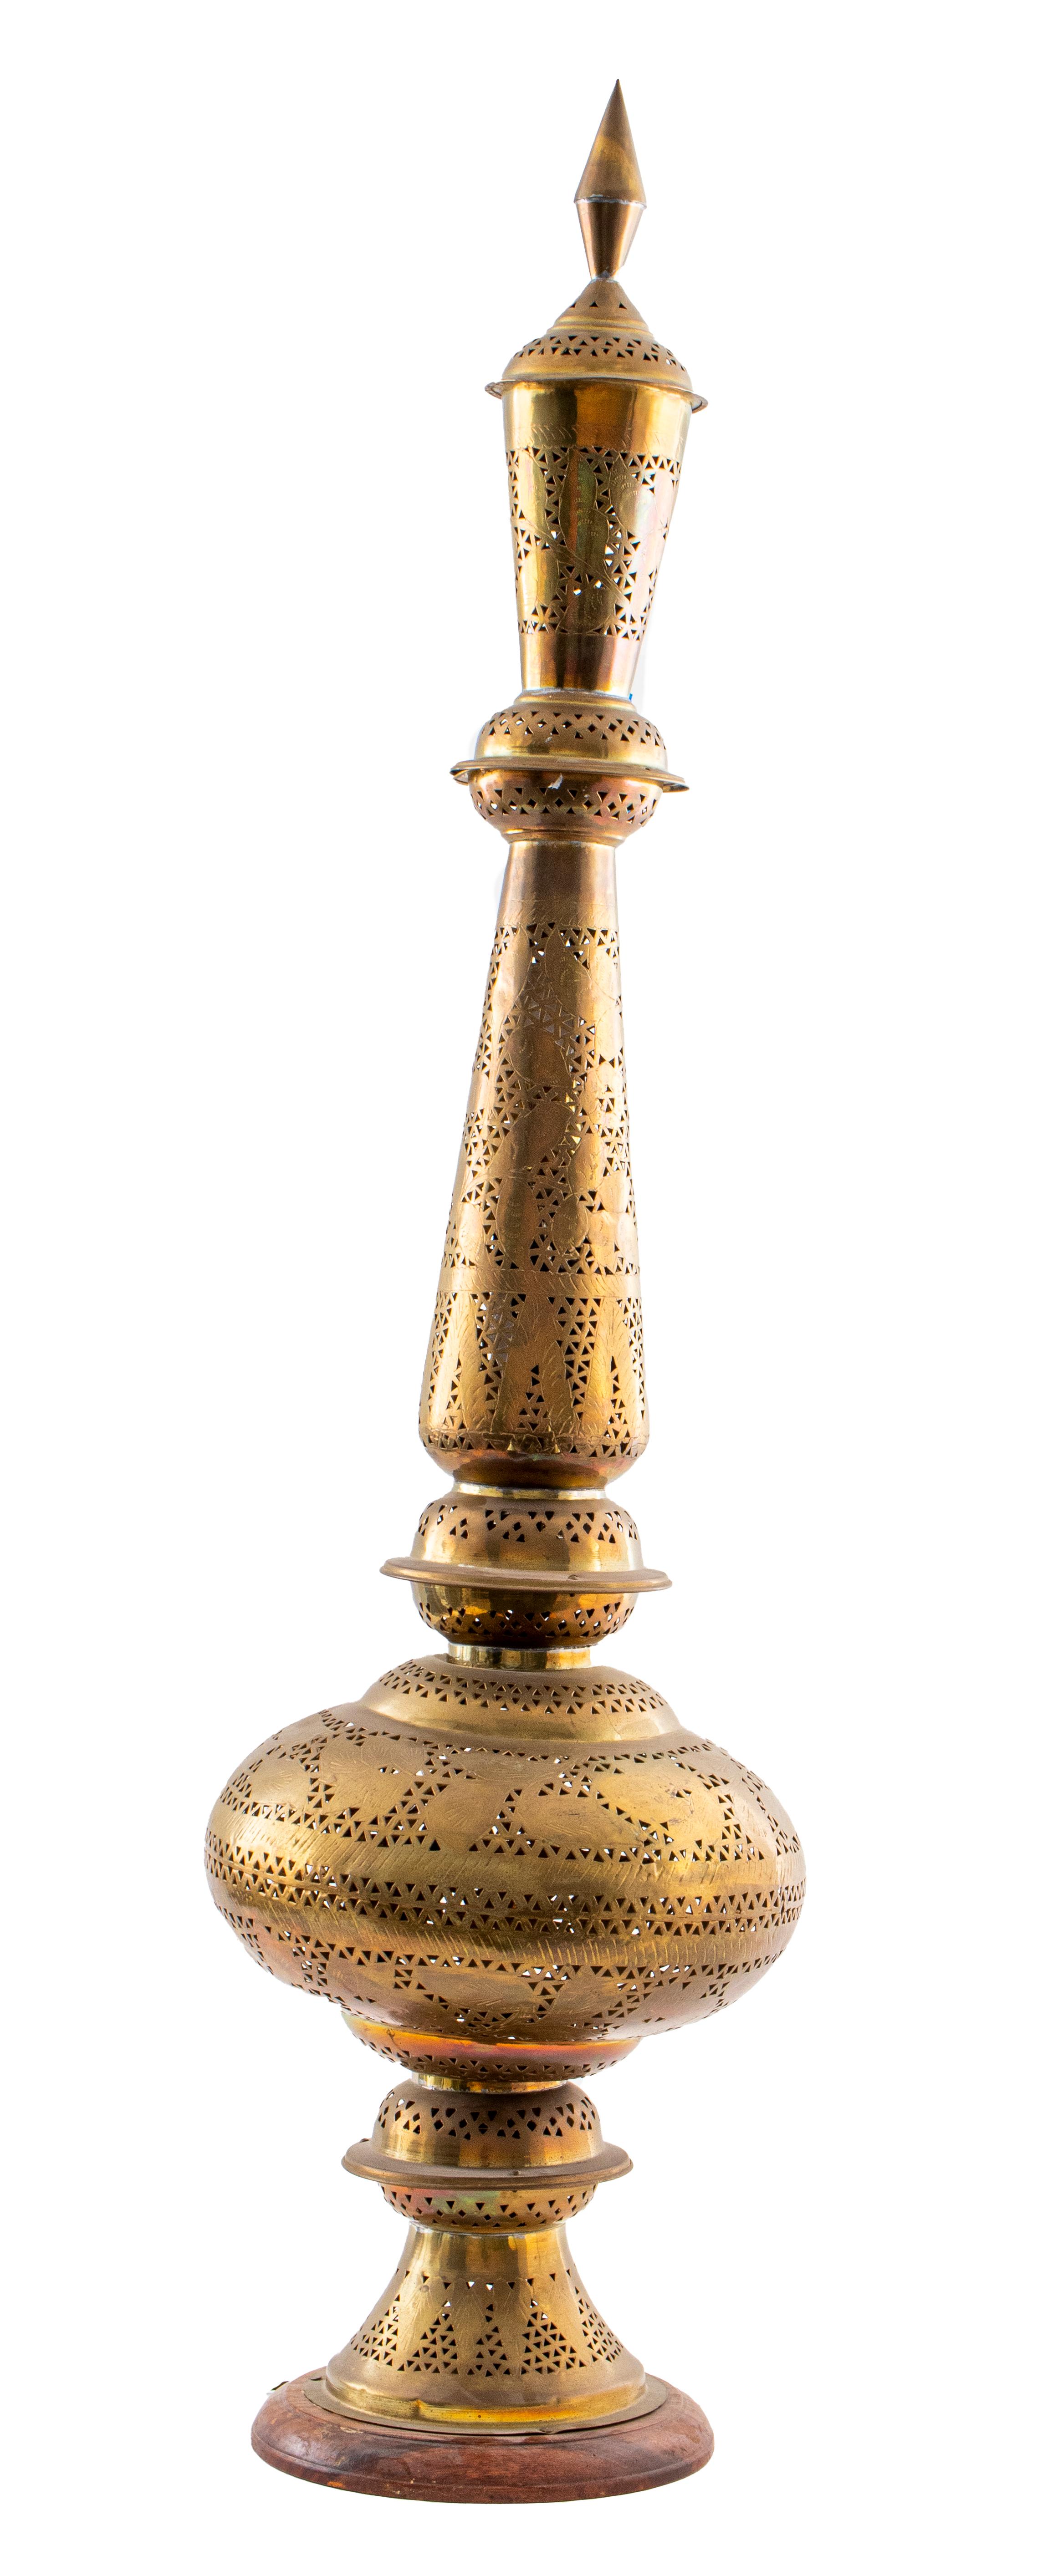 Moroccan pierced brass floor lamp on a wooden base, with interior lights. Measures: 49